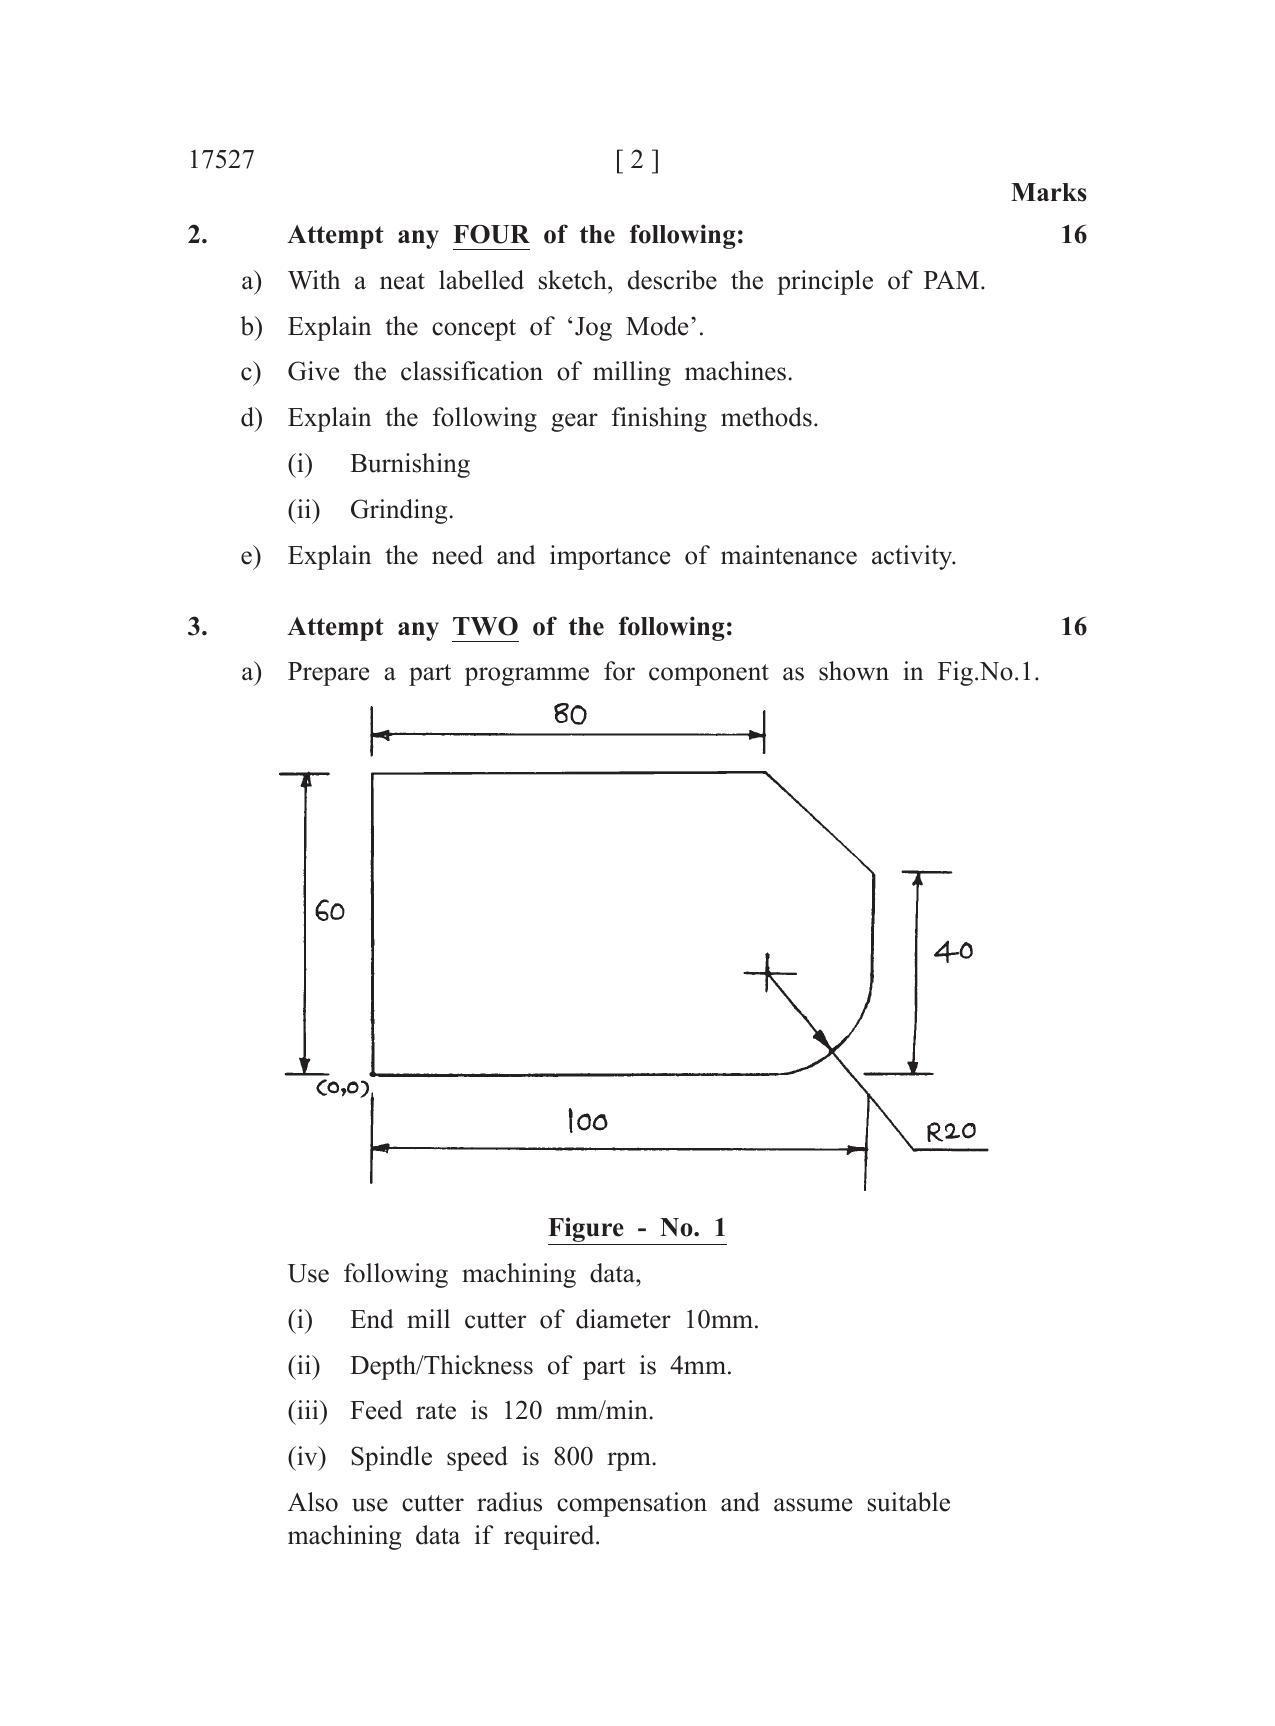 MSBTE Winter Question Paper 2019 - Advanced Manufacturing Processes - Page 2